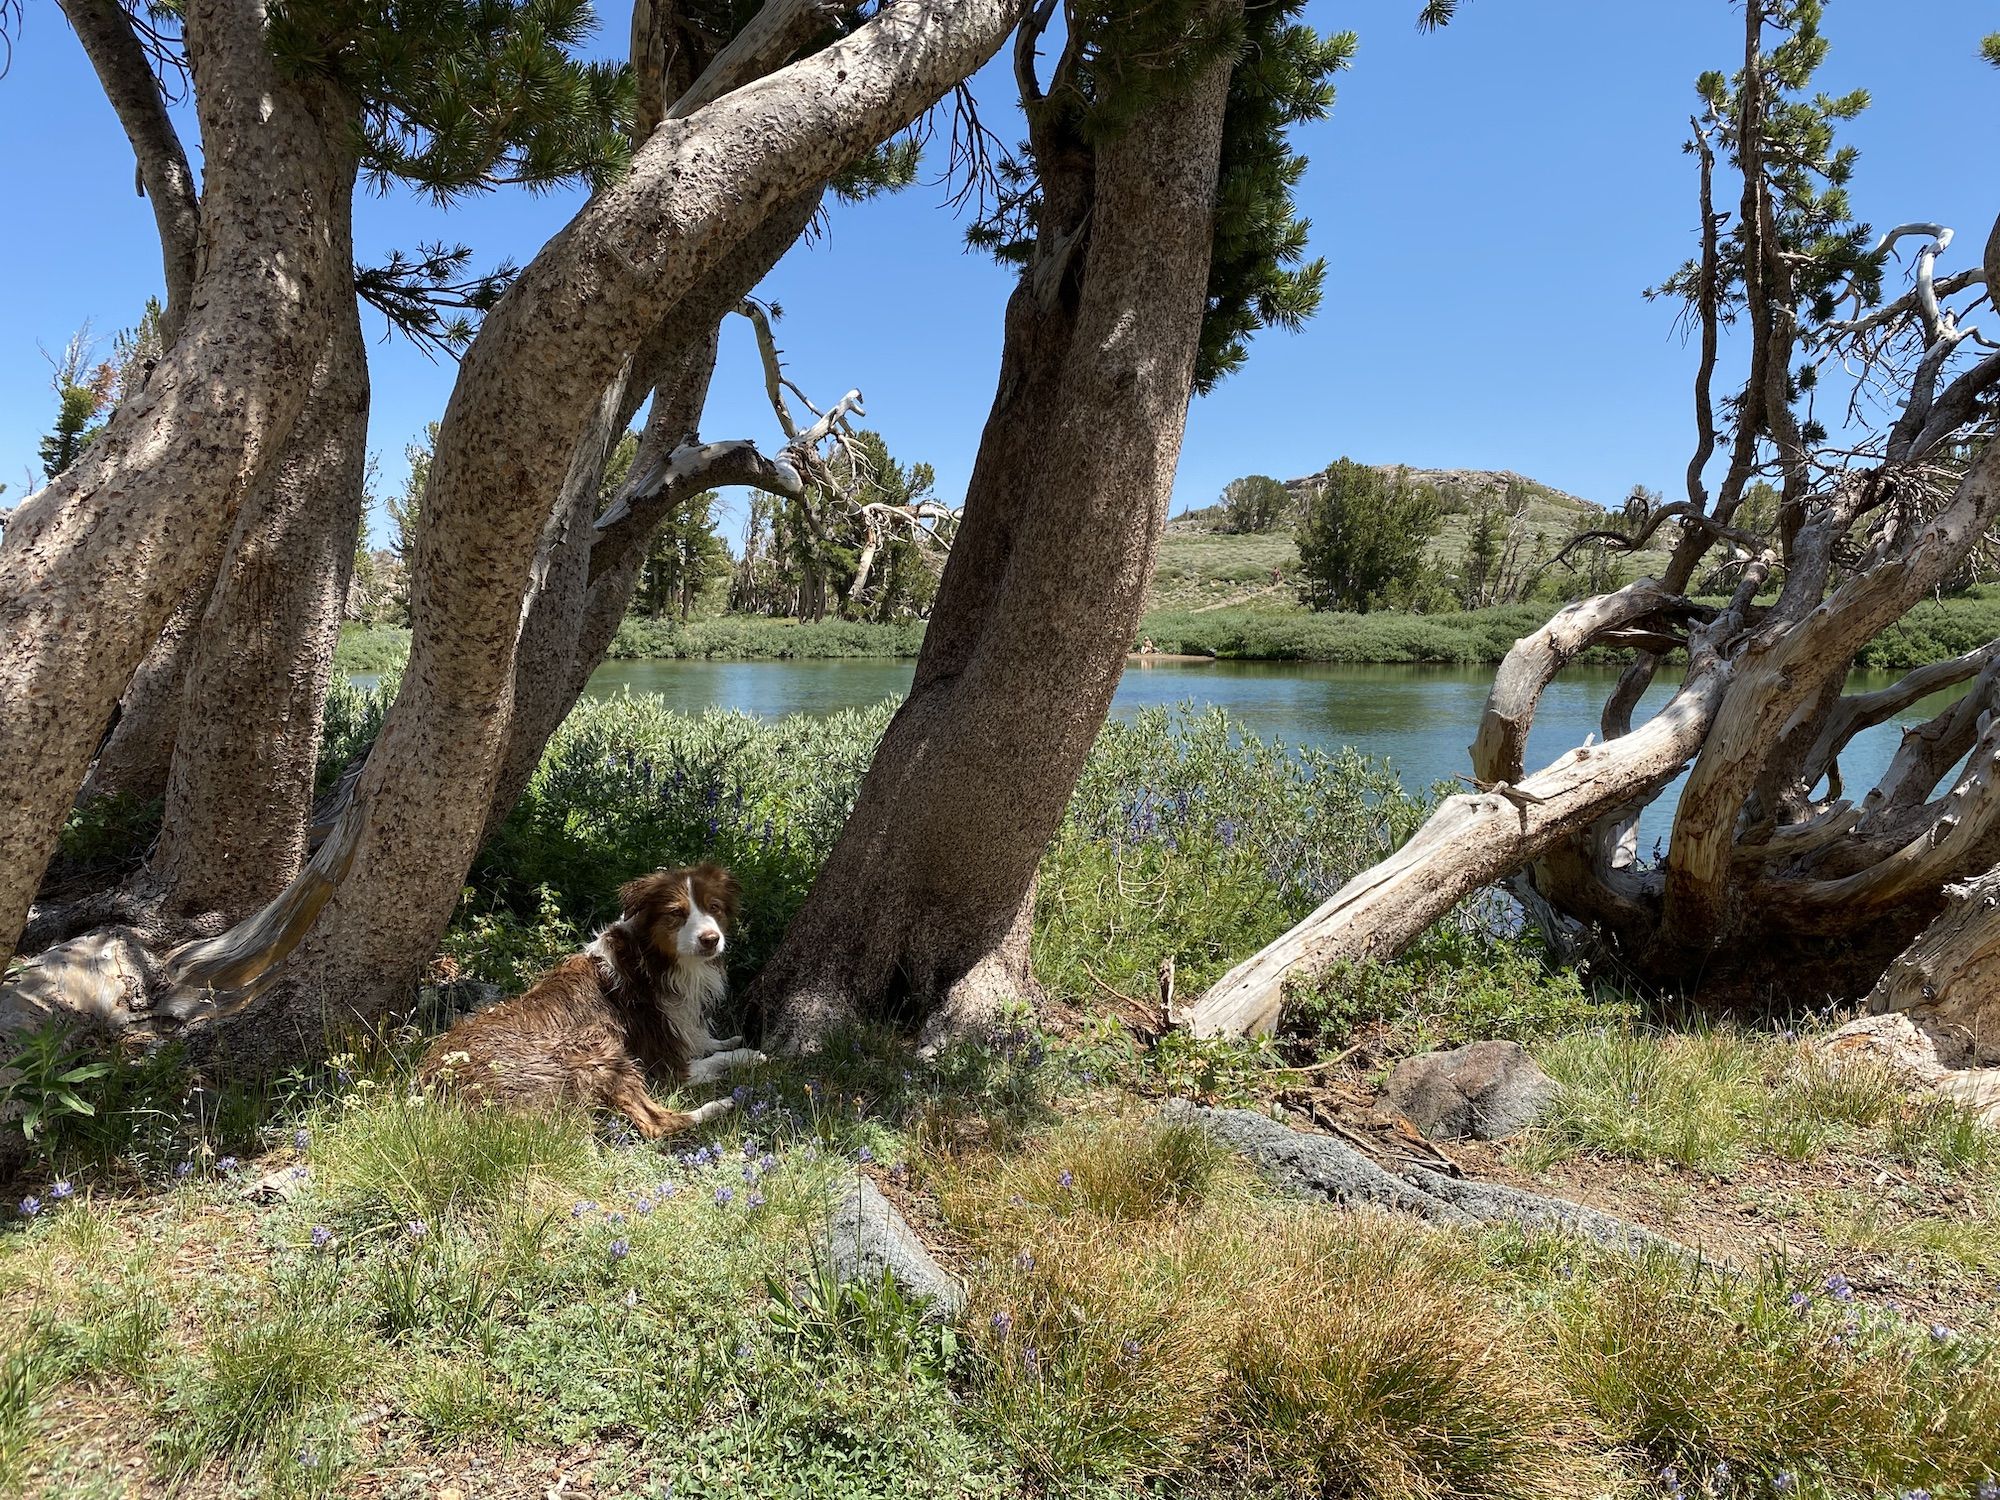 A dog lying in the shade under a tree next to a lake